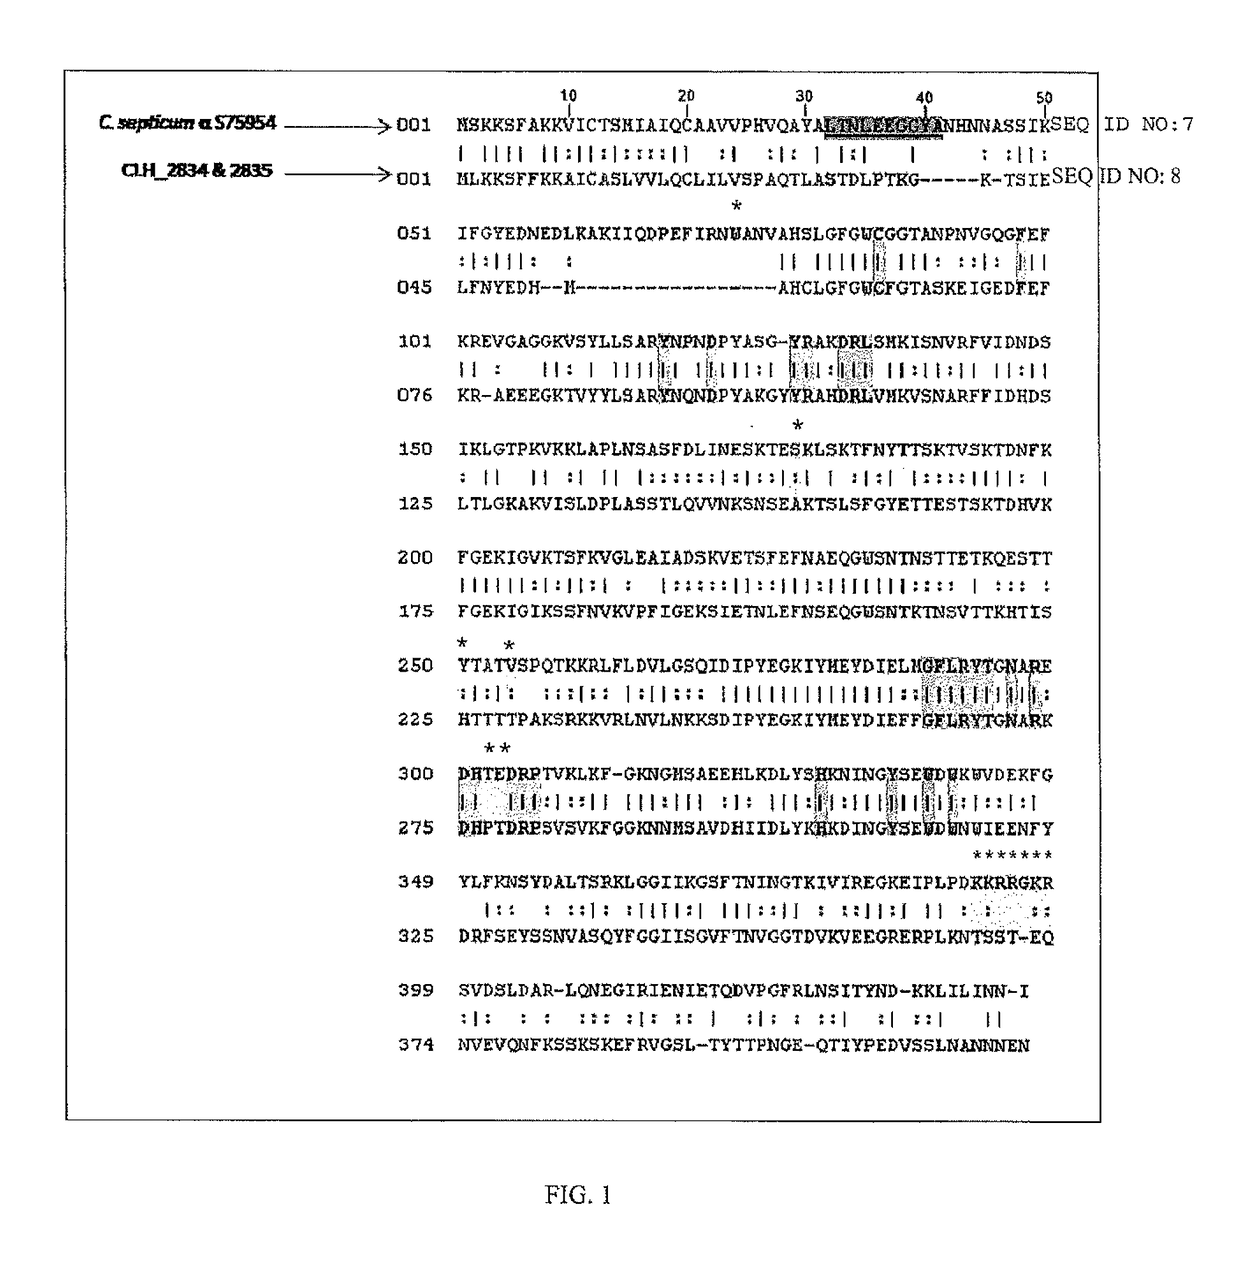 Clostridium histolyticum enzymes and methods for the use thereof